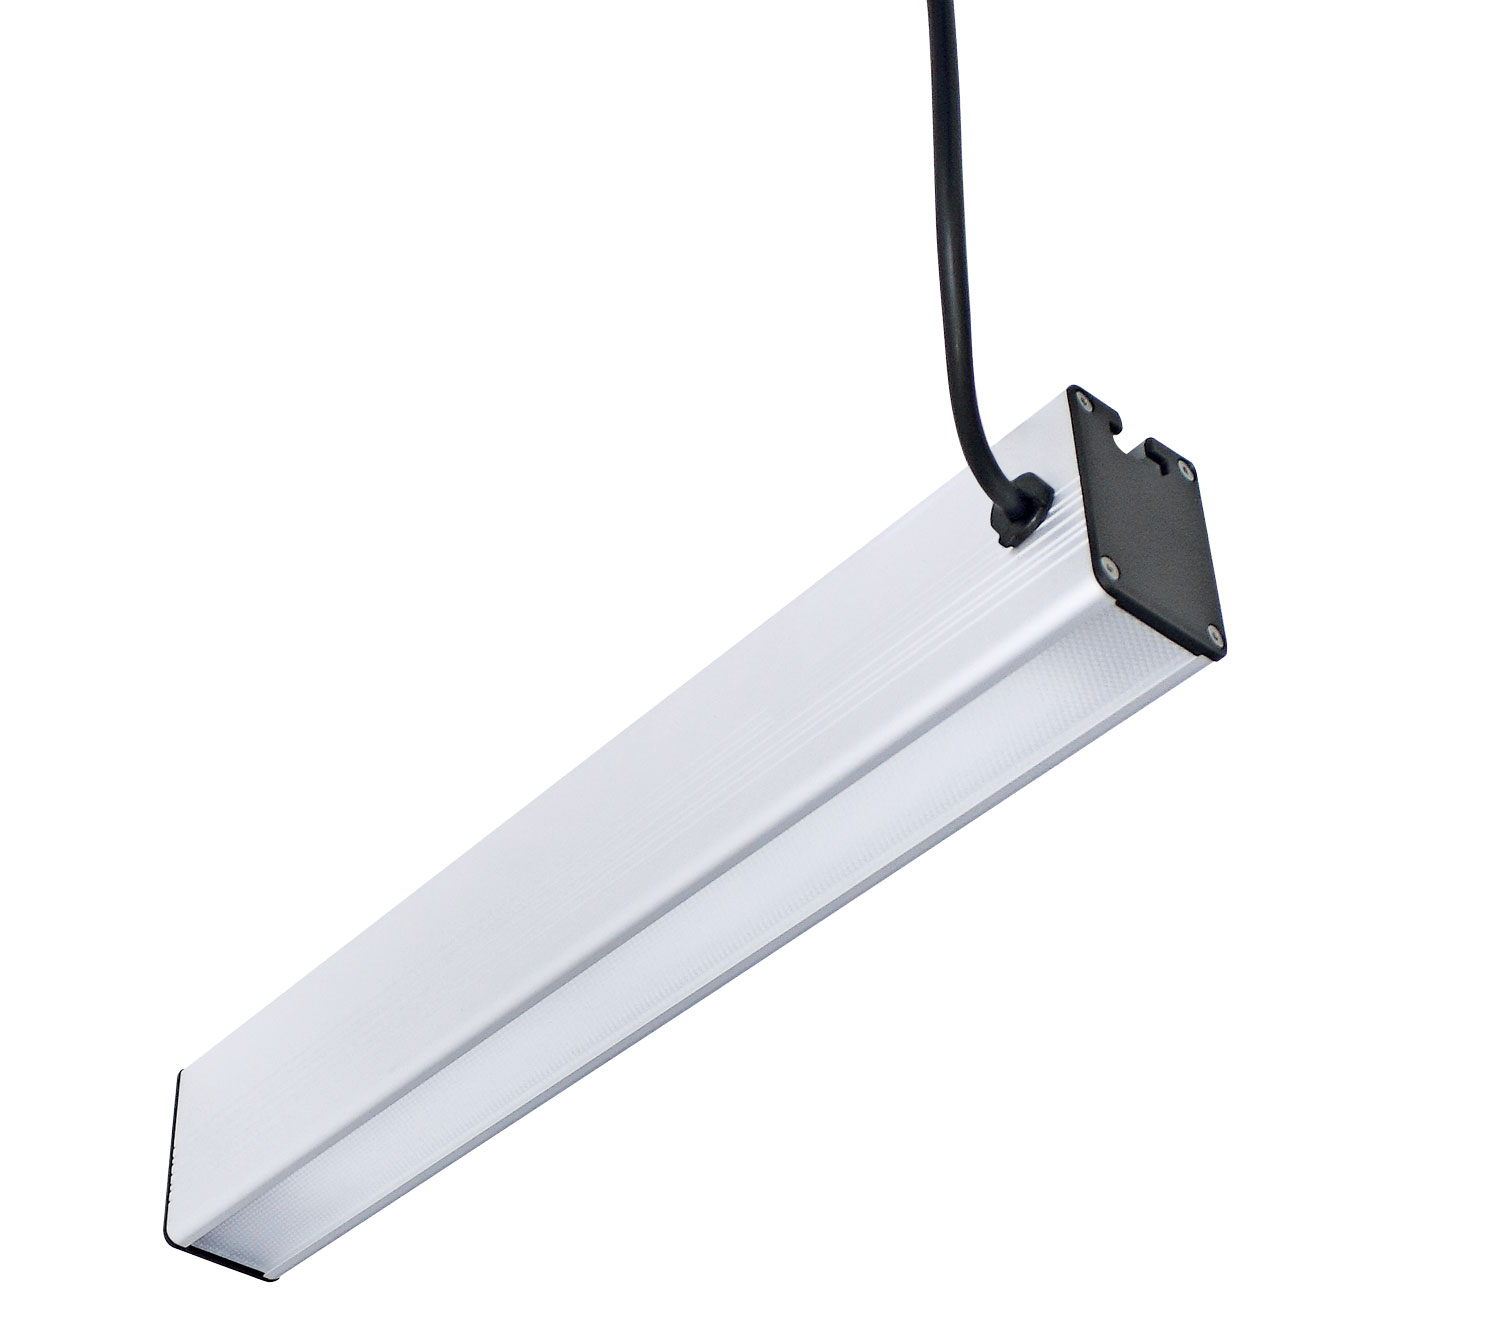 Profile luminaire with T-slot on the back PROFILED AC, 900 mm, microprism cover, 220-240V AC